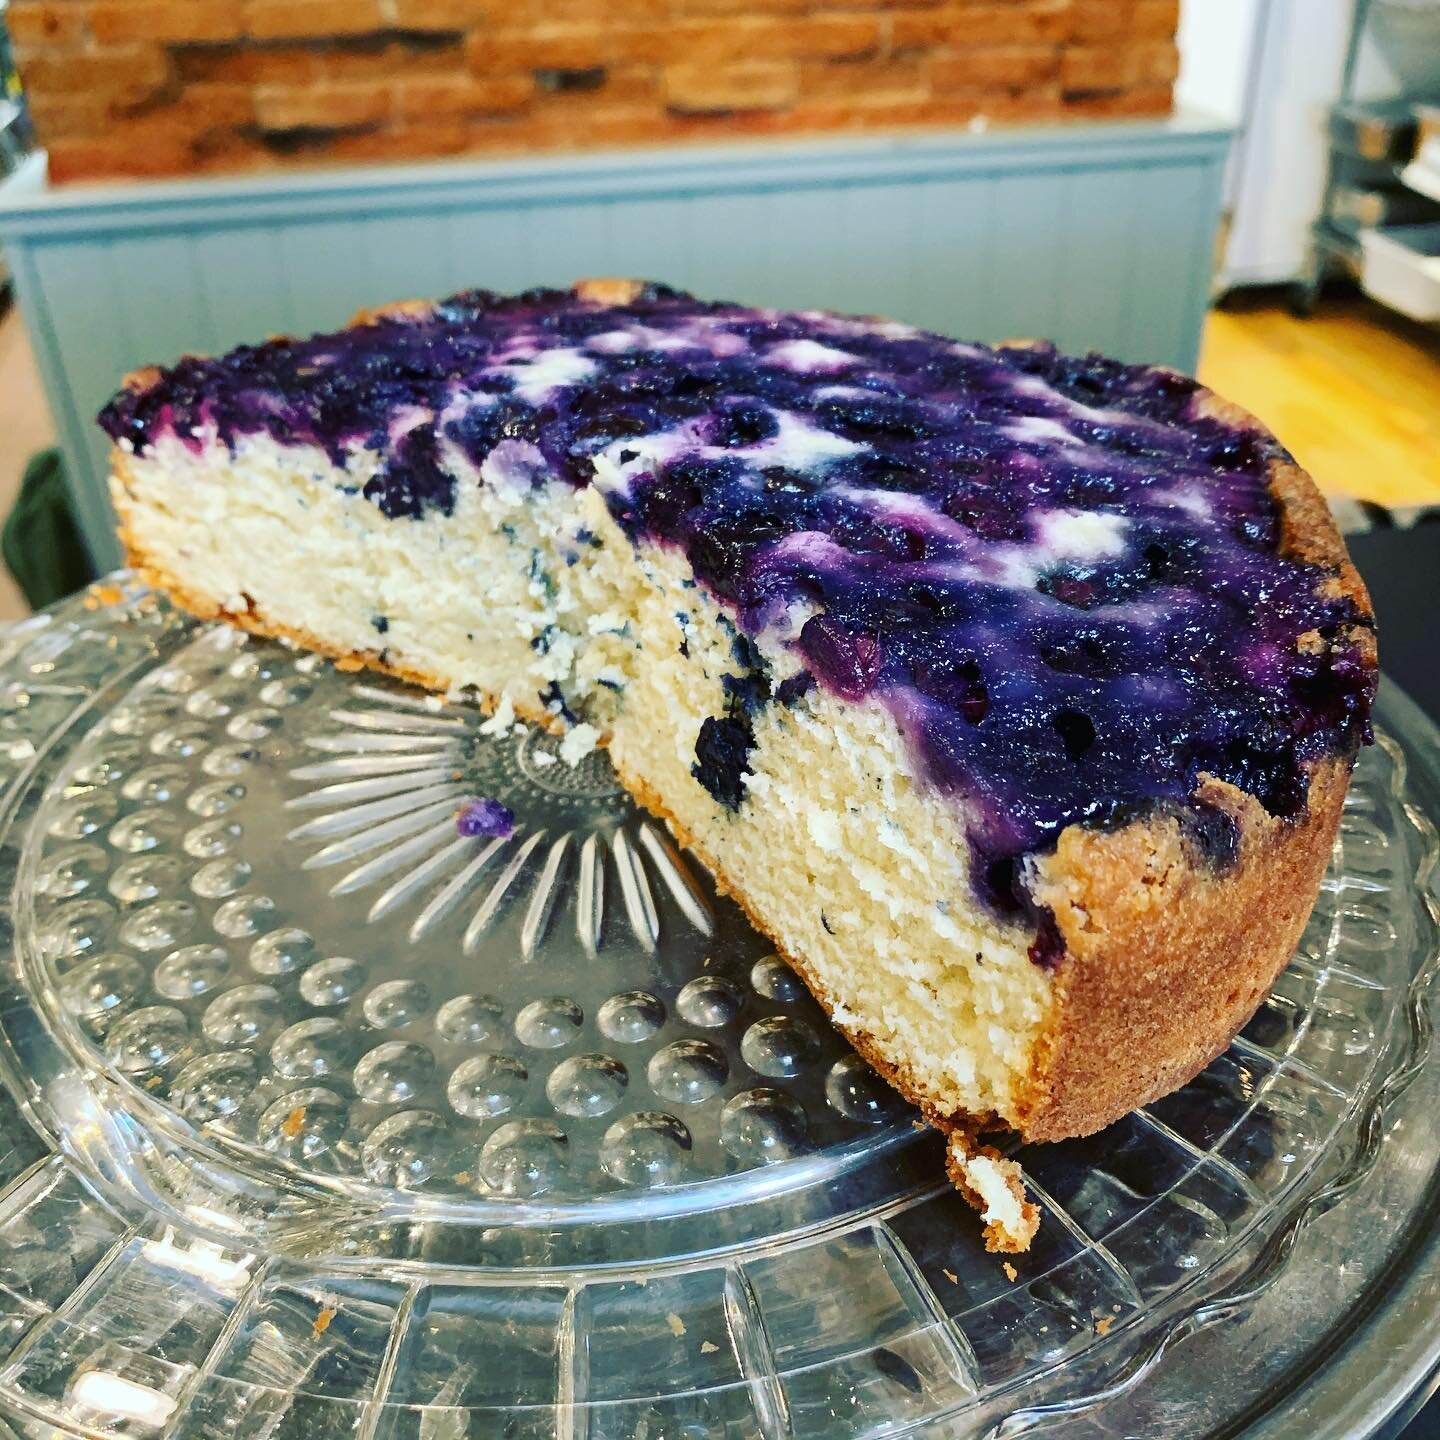 Happy Labor Day weekend everyone! Come join us tonight from 5-8:30 and enjoy a slice of this beautiful blueberry buttermilk cake, it&rsquo;s got your name on it! (Pairs nicely with a glass of Prosecco too)

#dessert #winebar #downtownsonora #traveltu